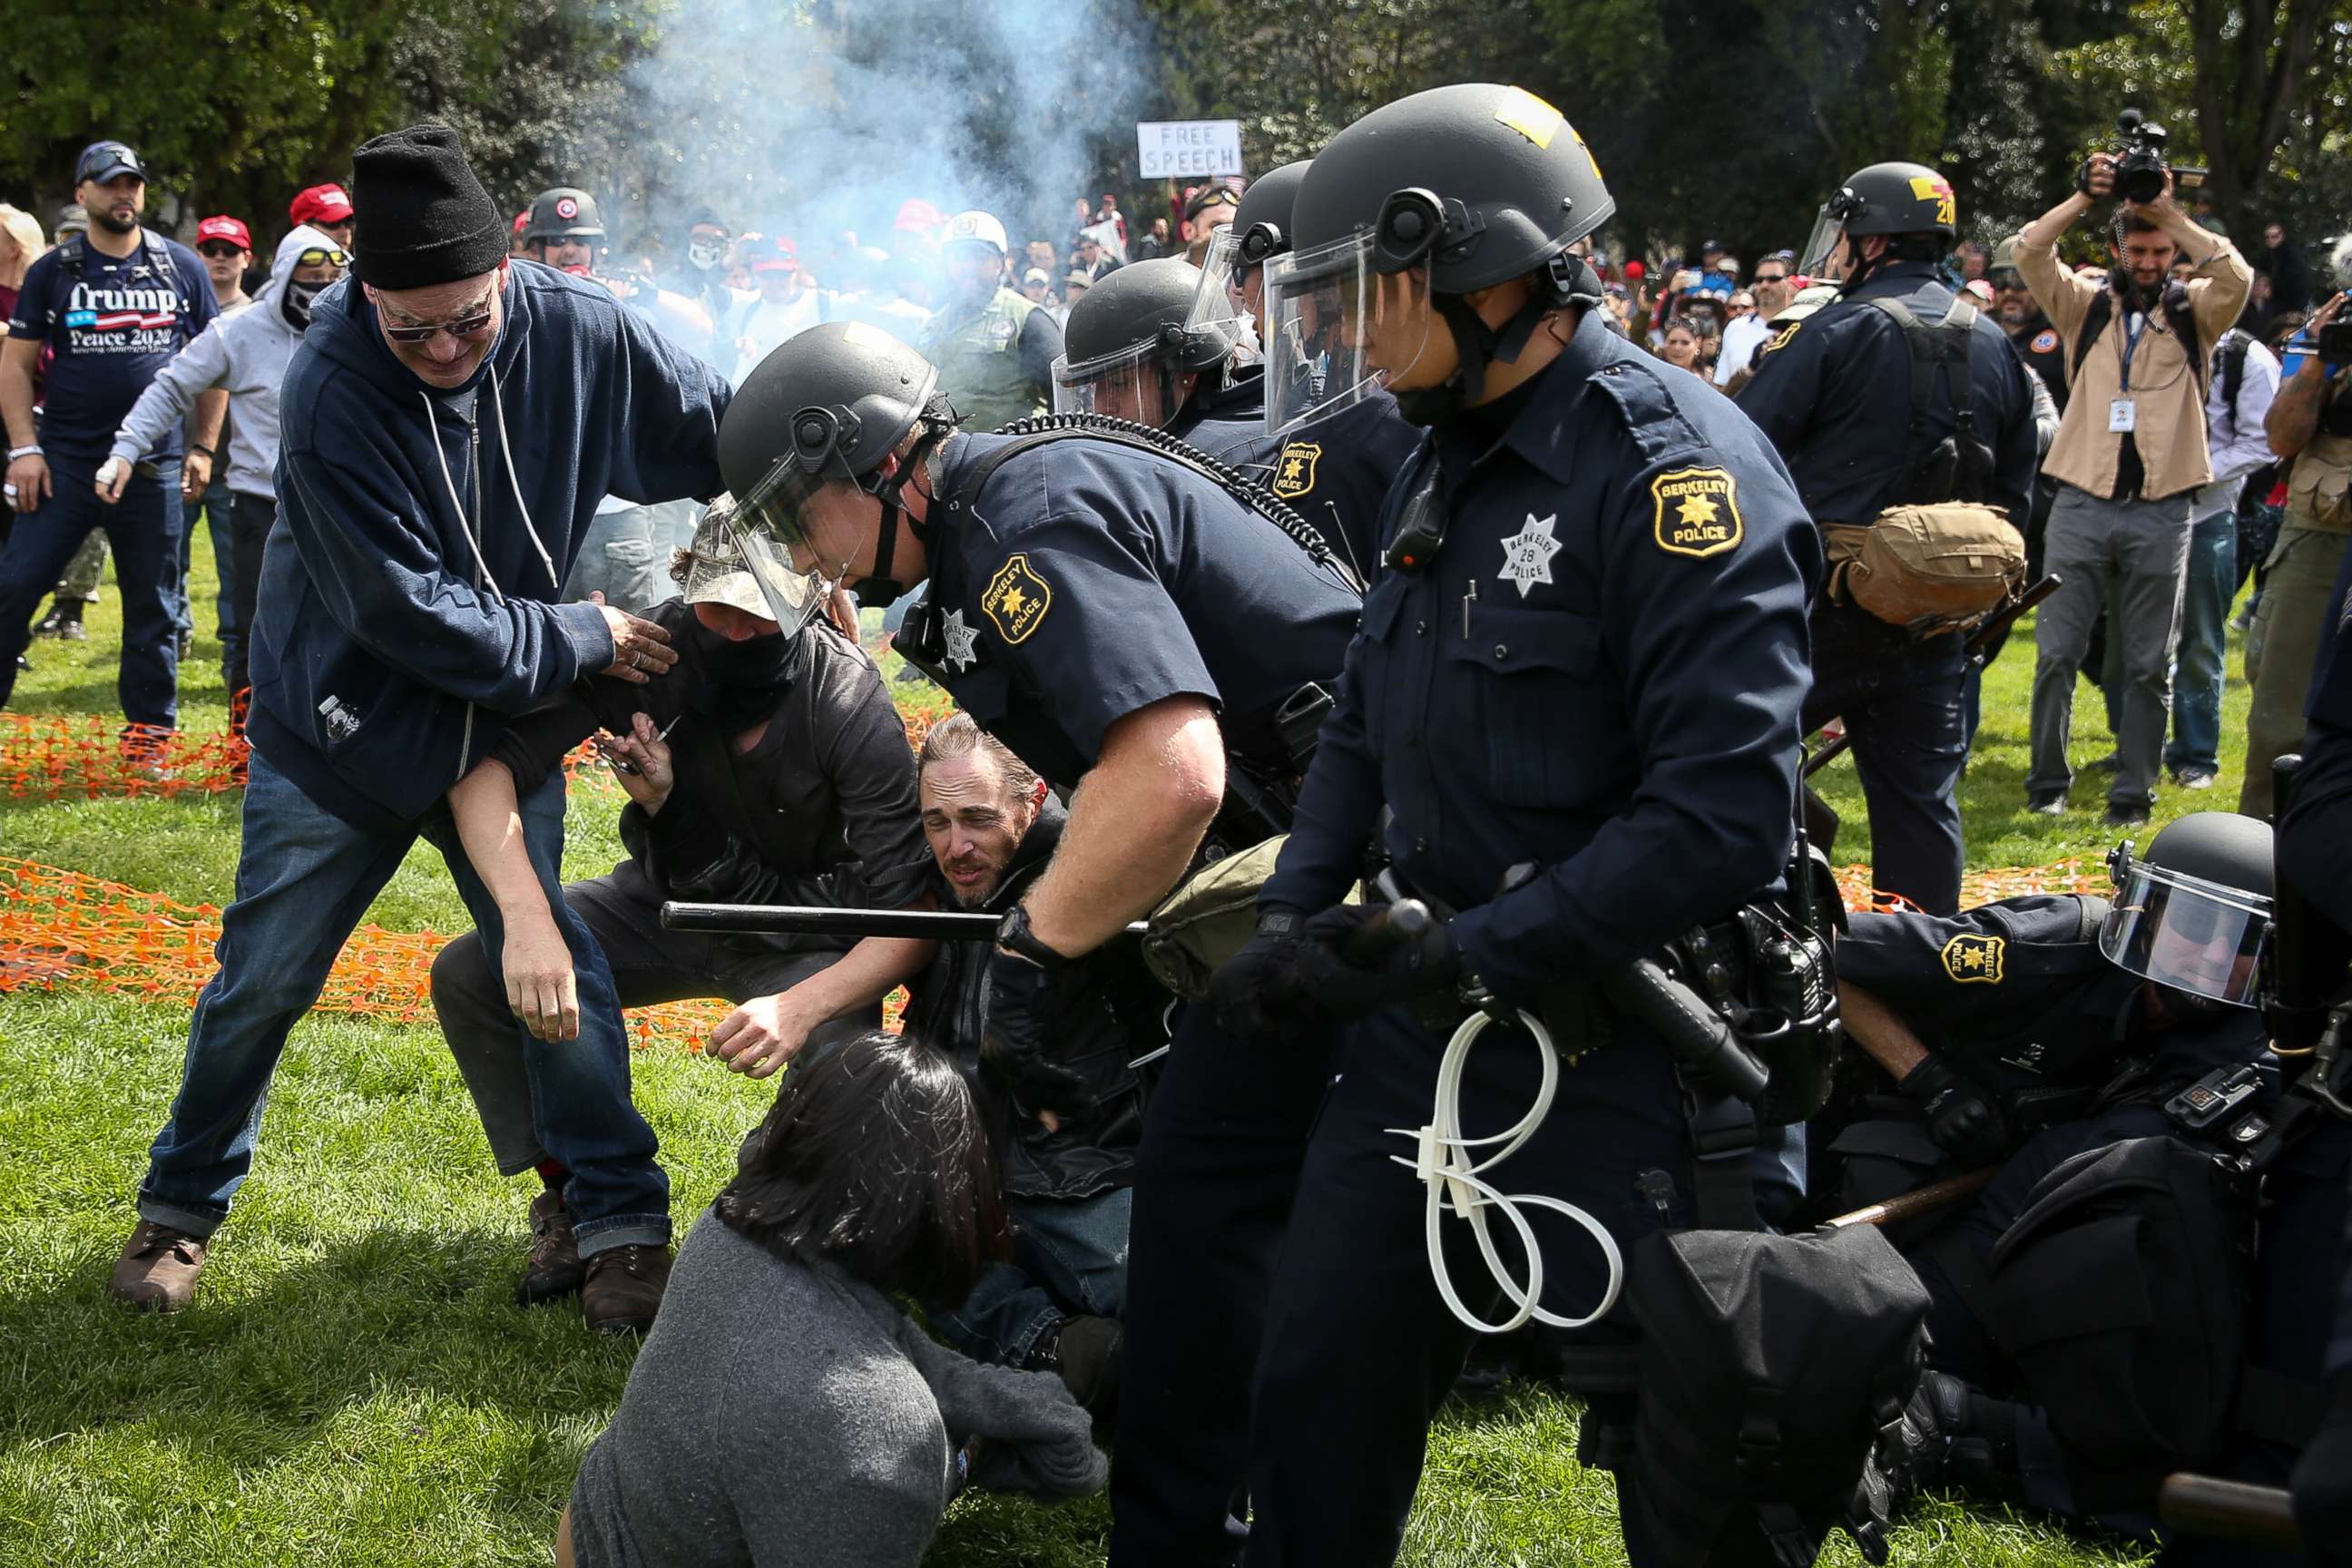 PHOTO: Police intervene as Trump supporters clash with protesters at a "Patriots Day" free speech rally on April 15, 2017 in Berkeley, Calif.